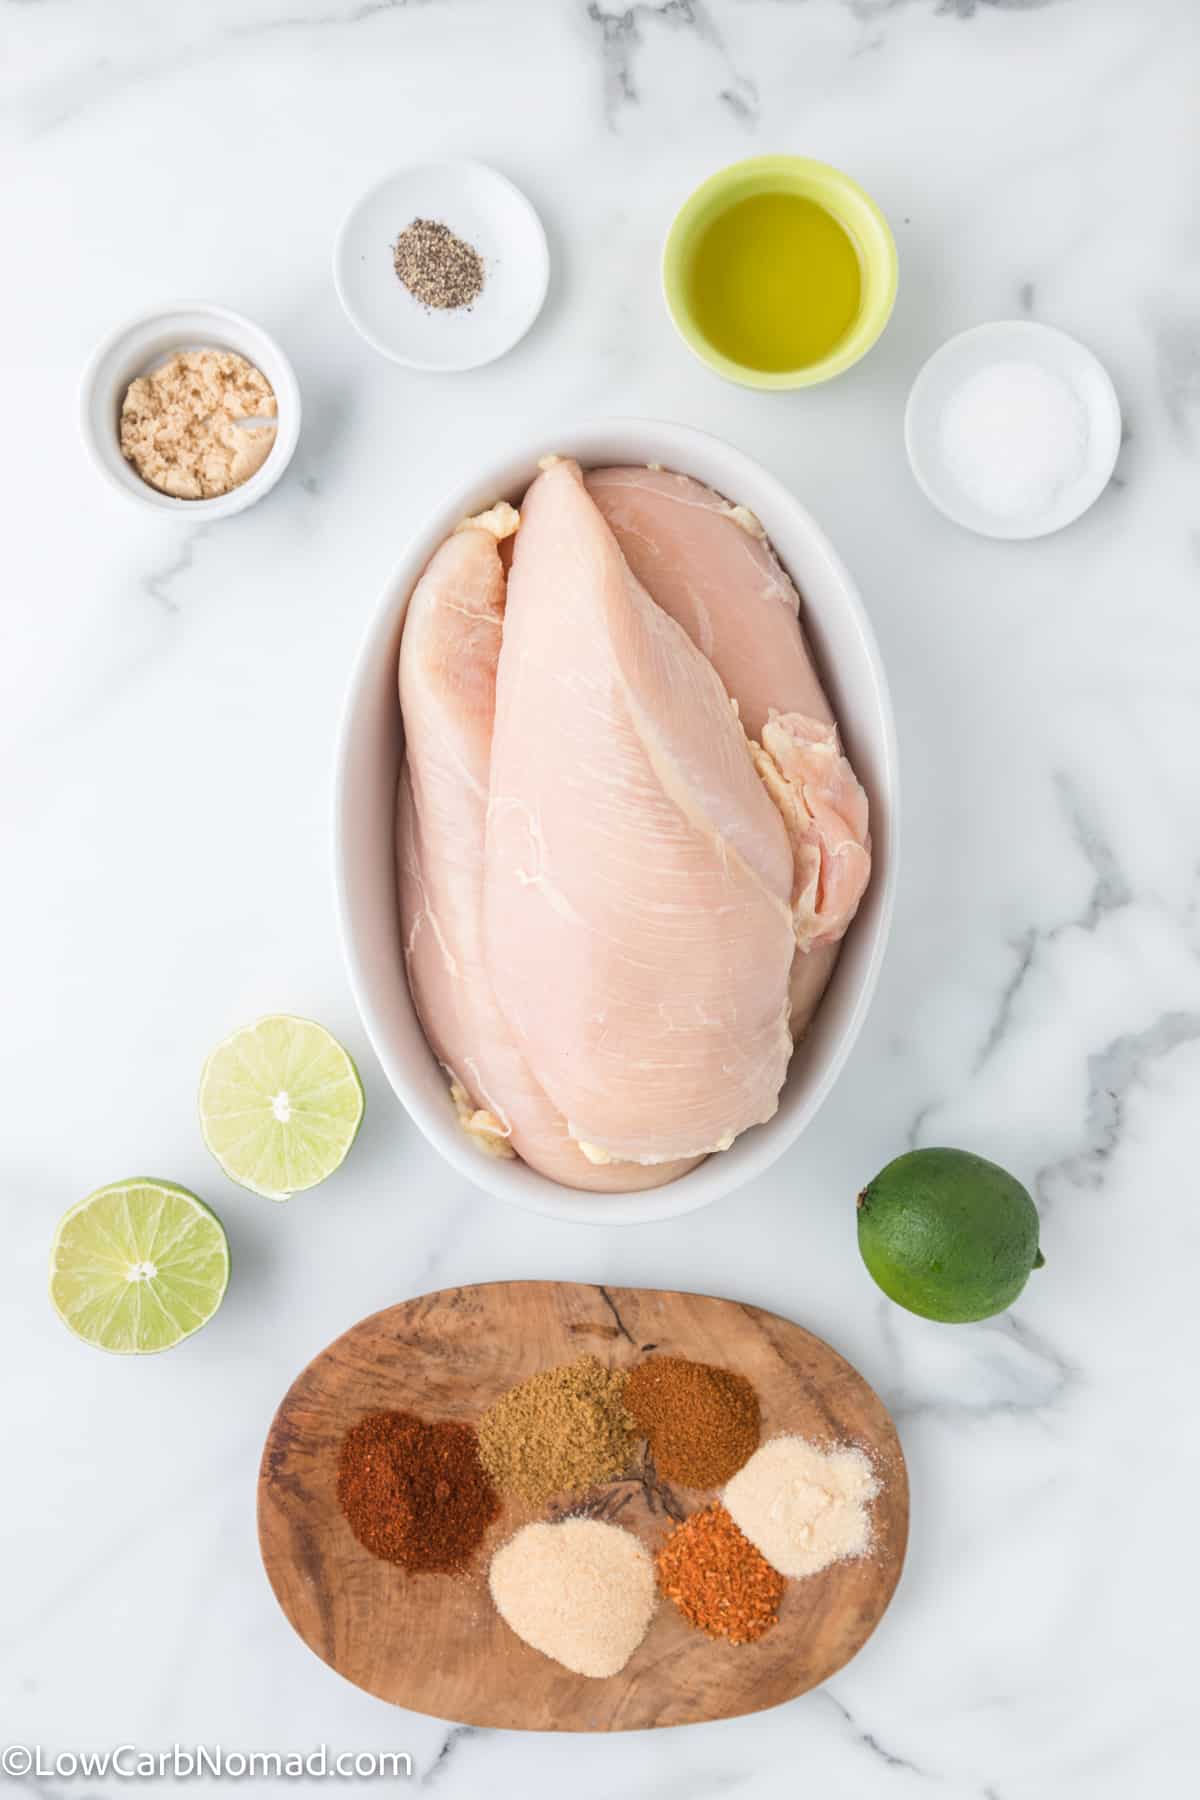 Baked Chili Lime Chicken Recipe ingredients